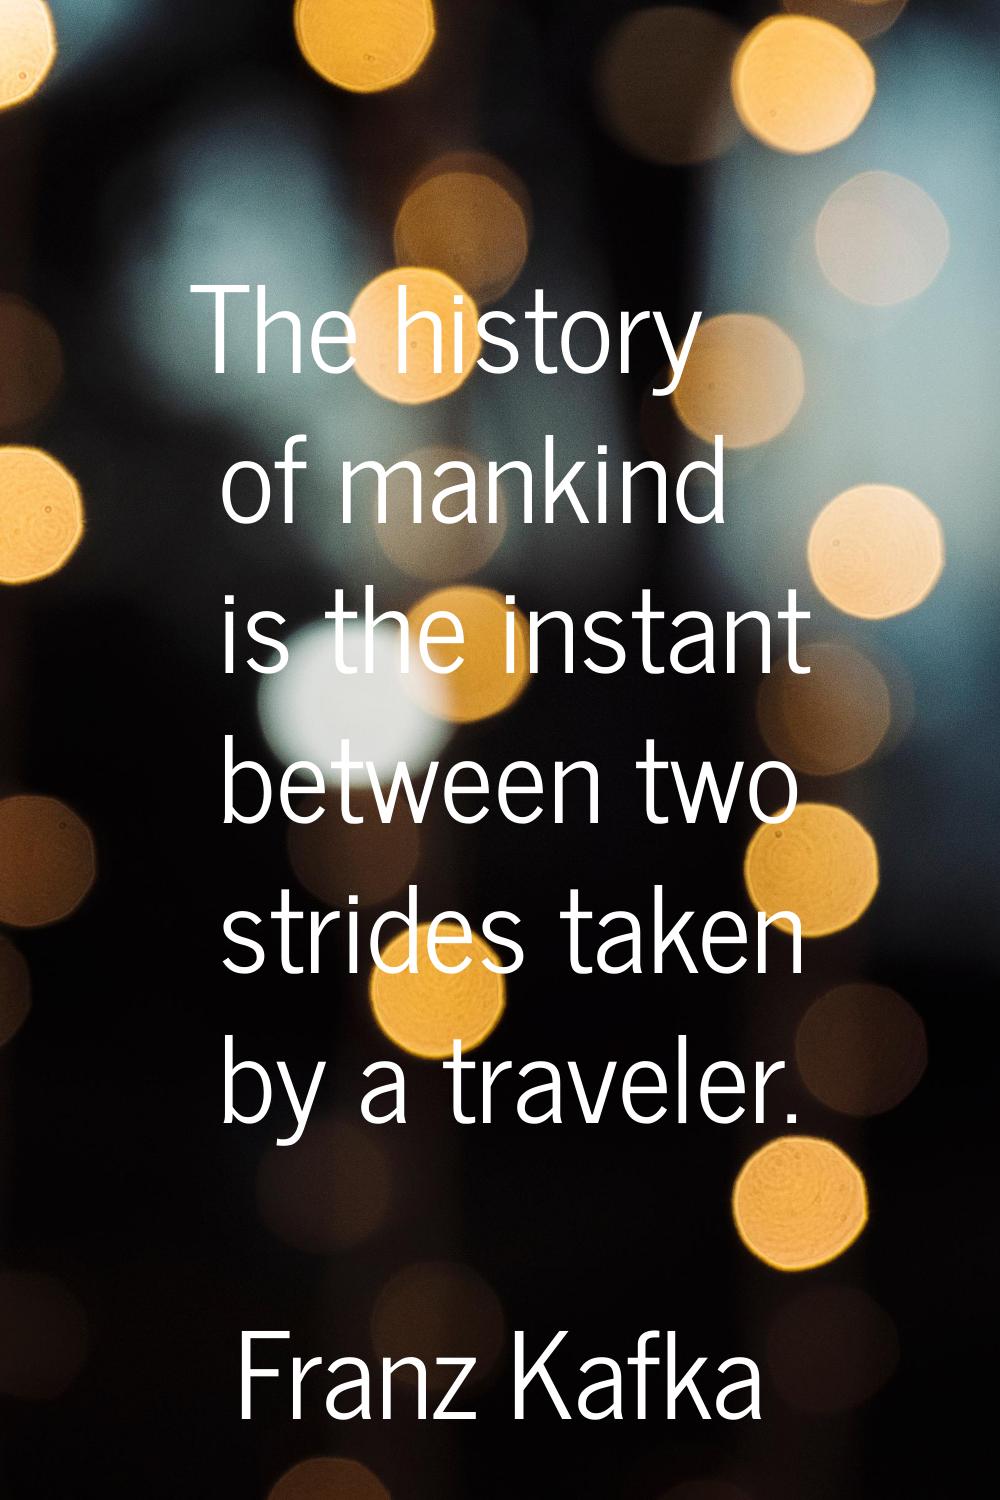 The history of mankind is the instant between two strides taken by a traveler.